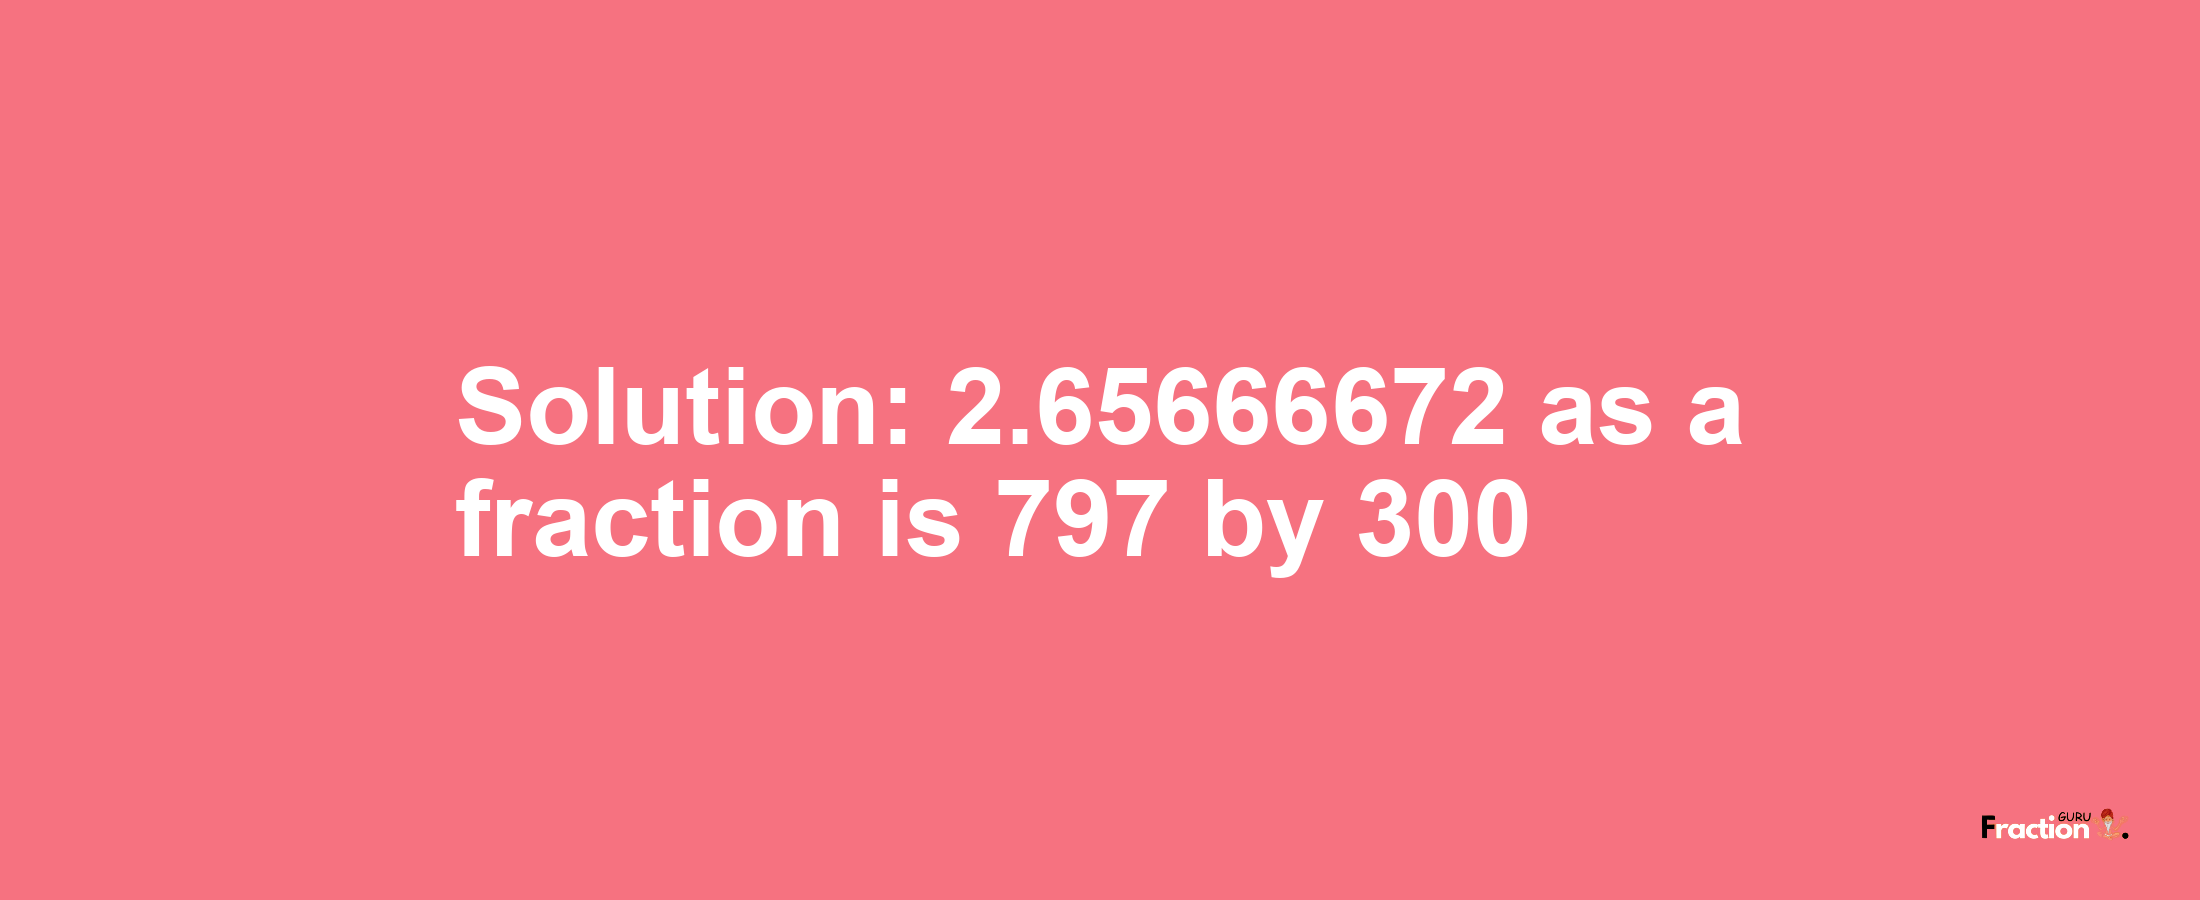 Solution:2.65666672 as a fraction is 797/300